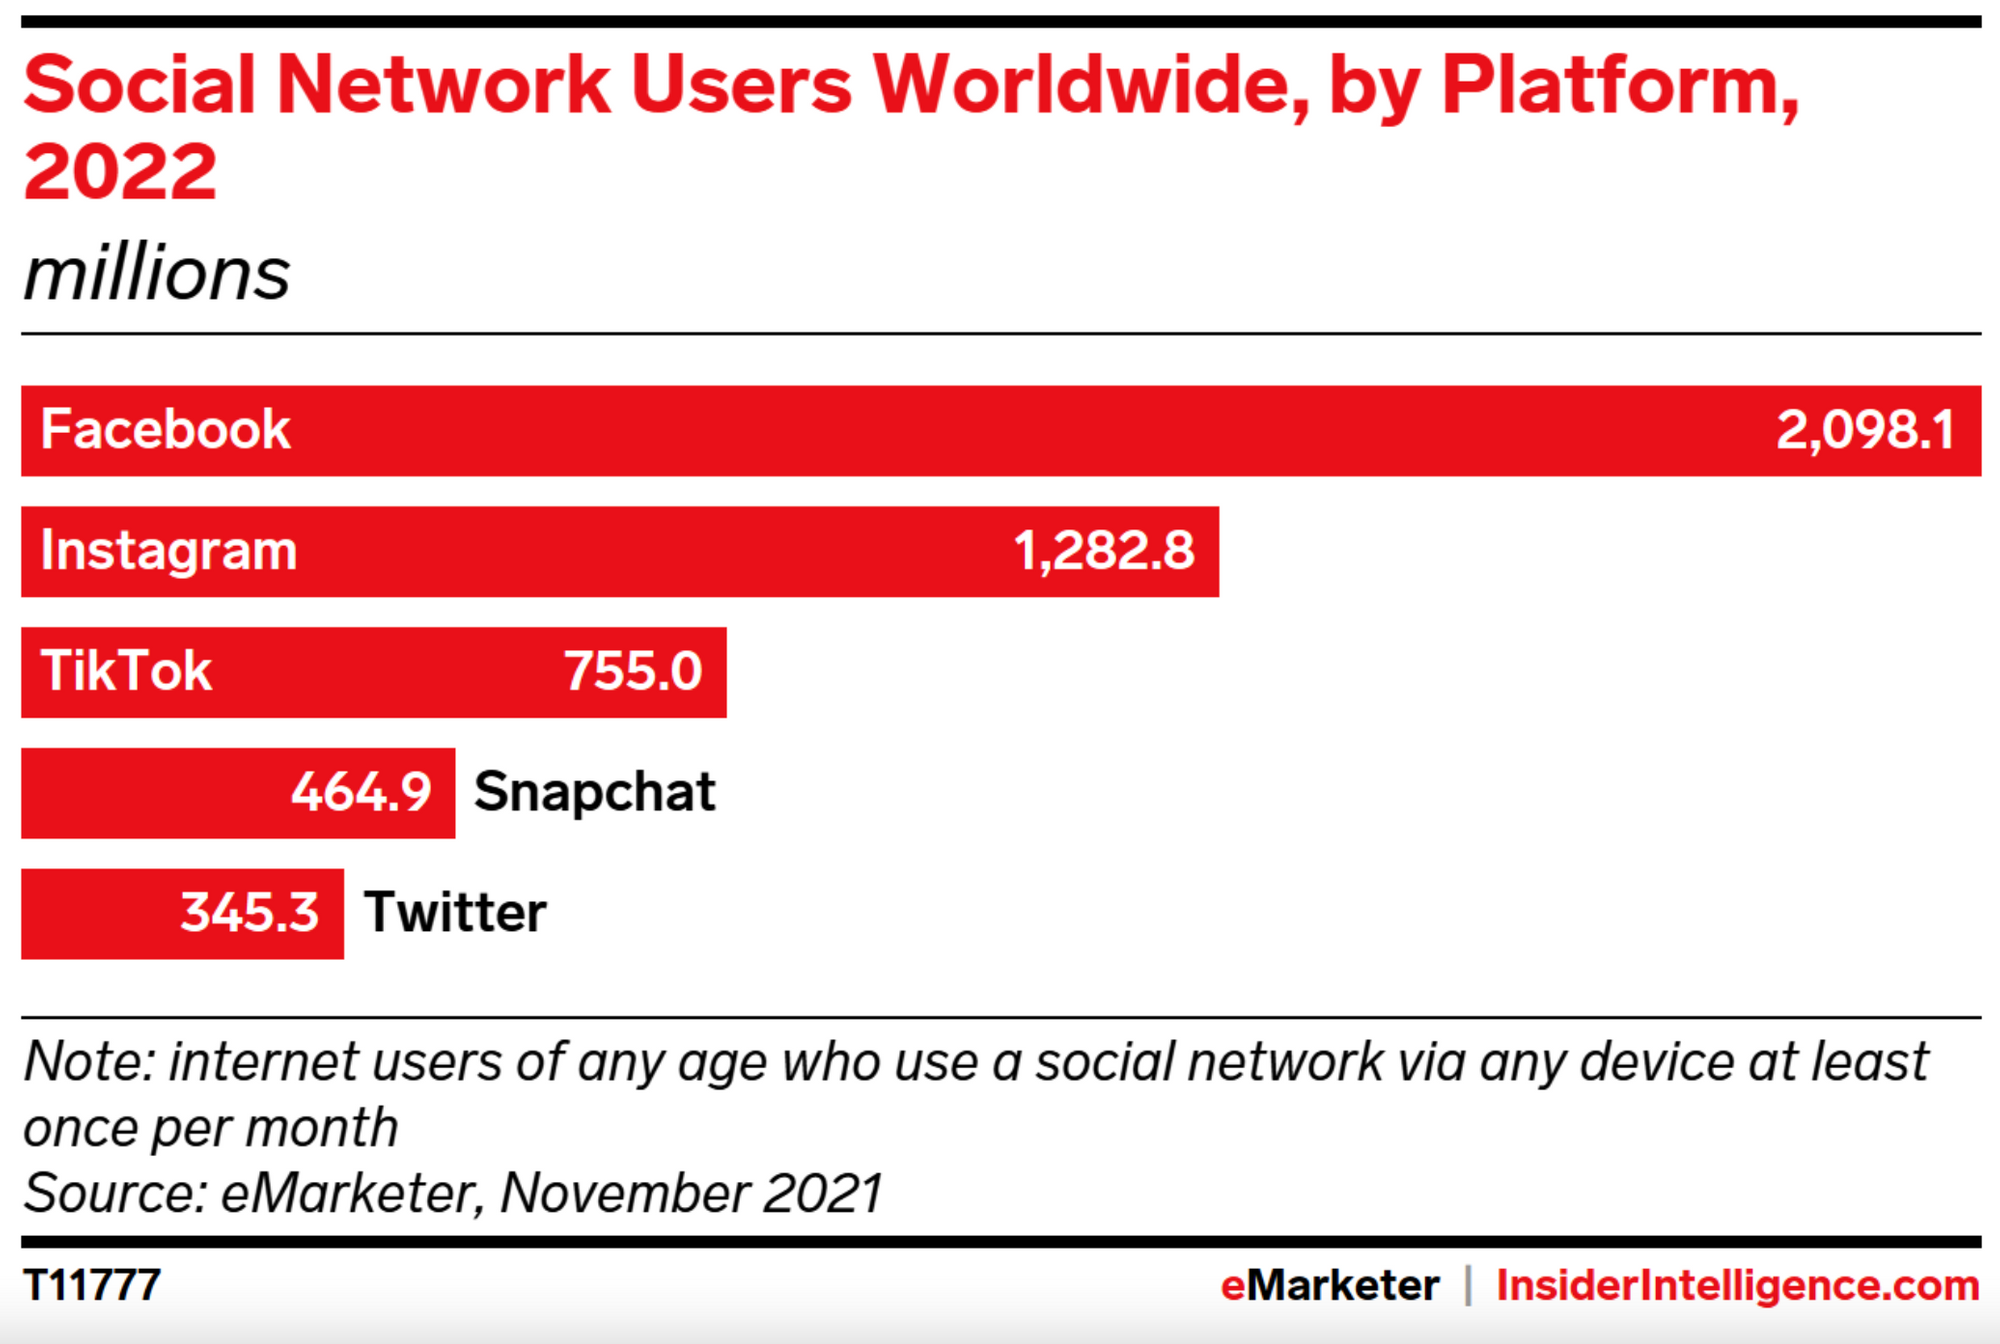 This is a chart showing why the increased usage of TikTok should be seen as an important social media trend in 2022.